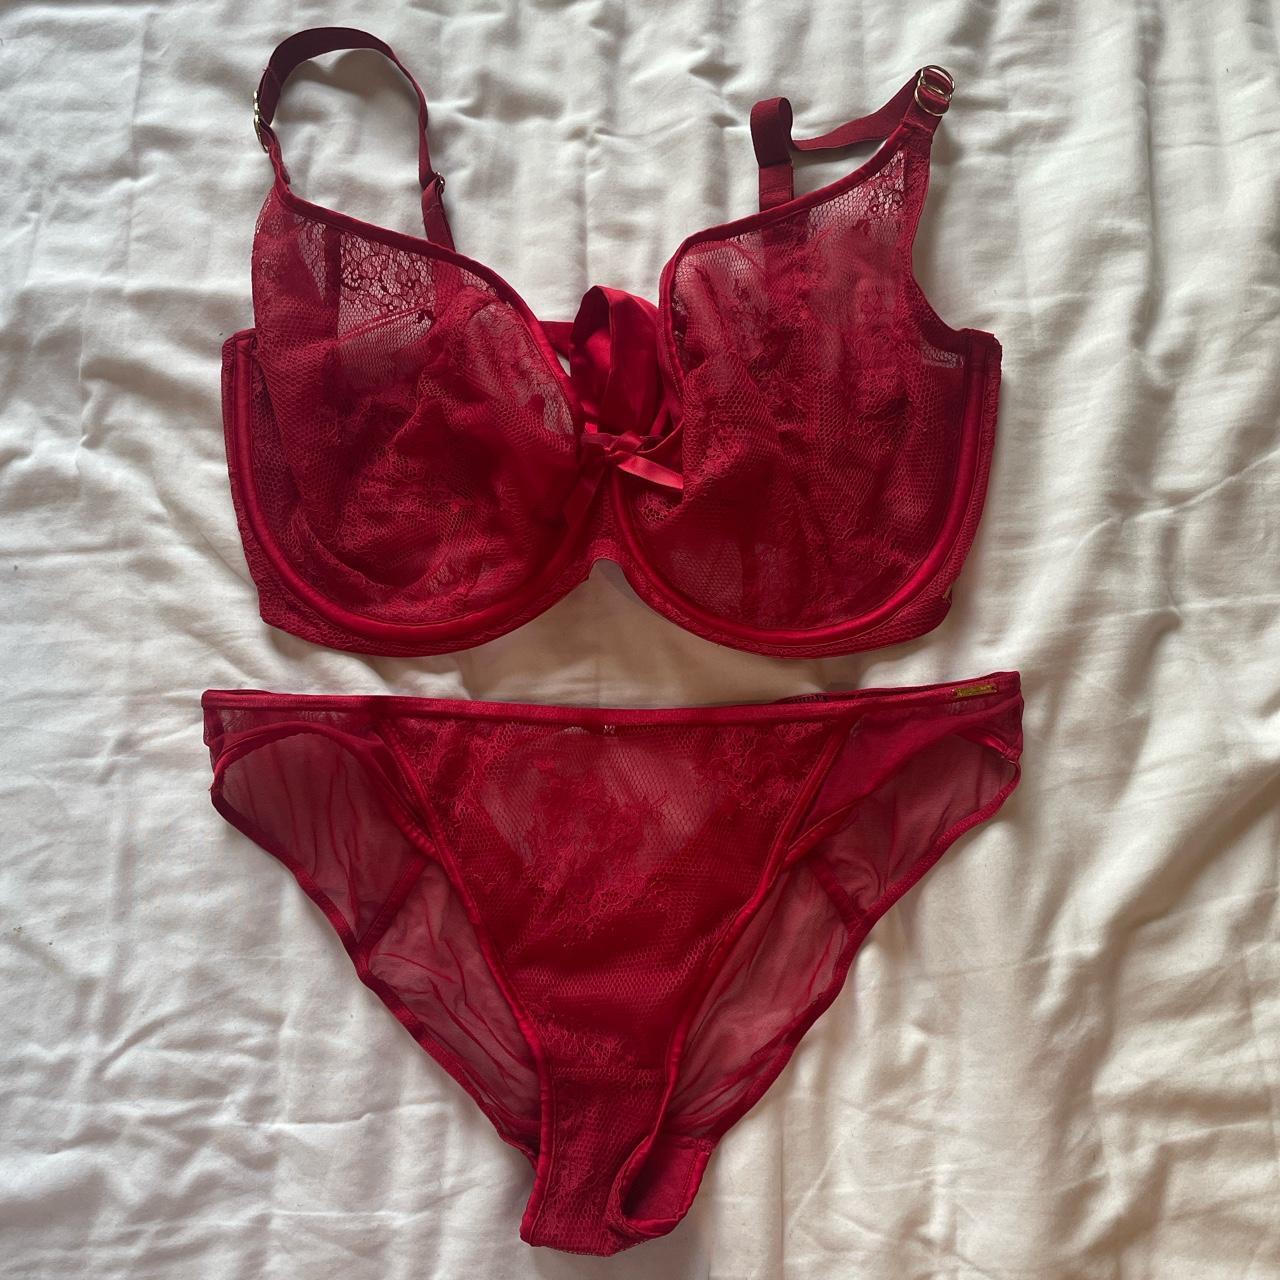 Boux Avenue Women's Red and Gold Bra | Depop